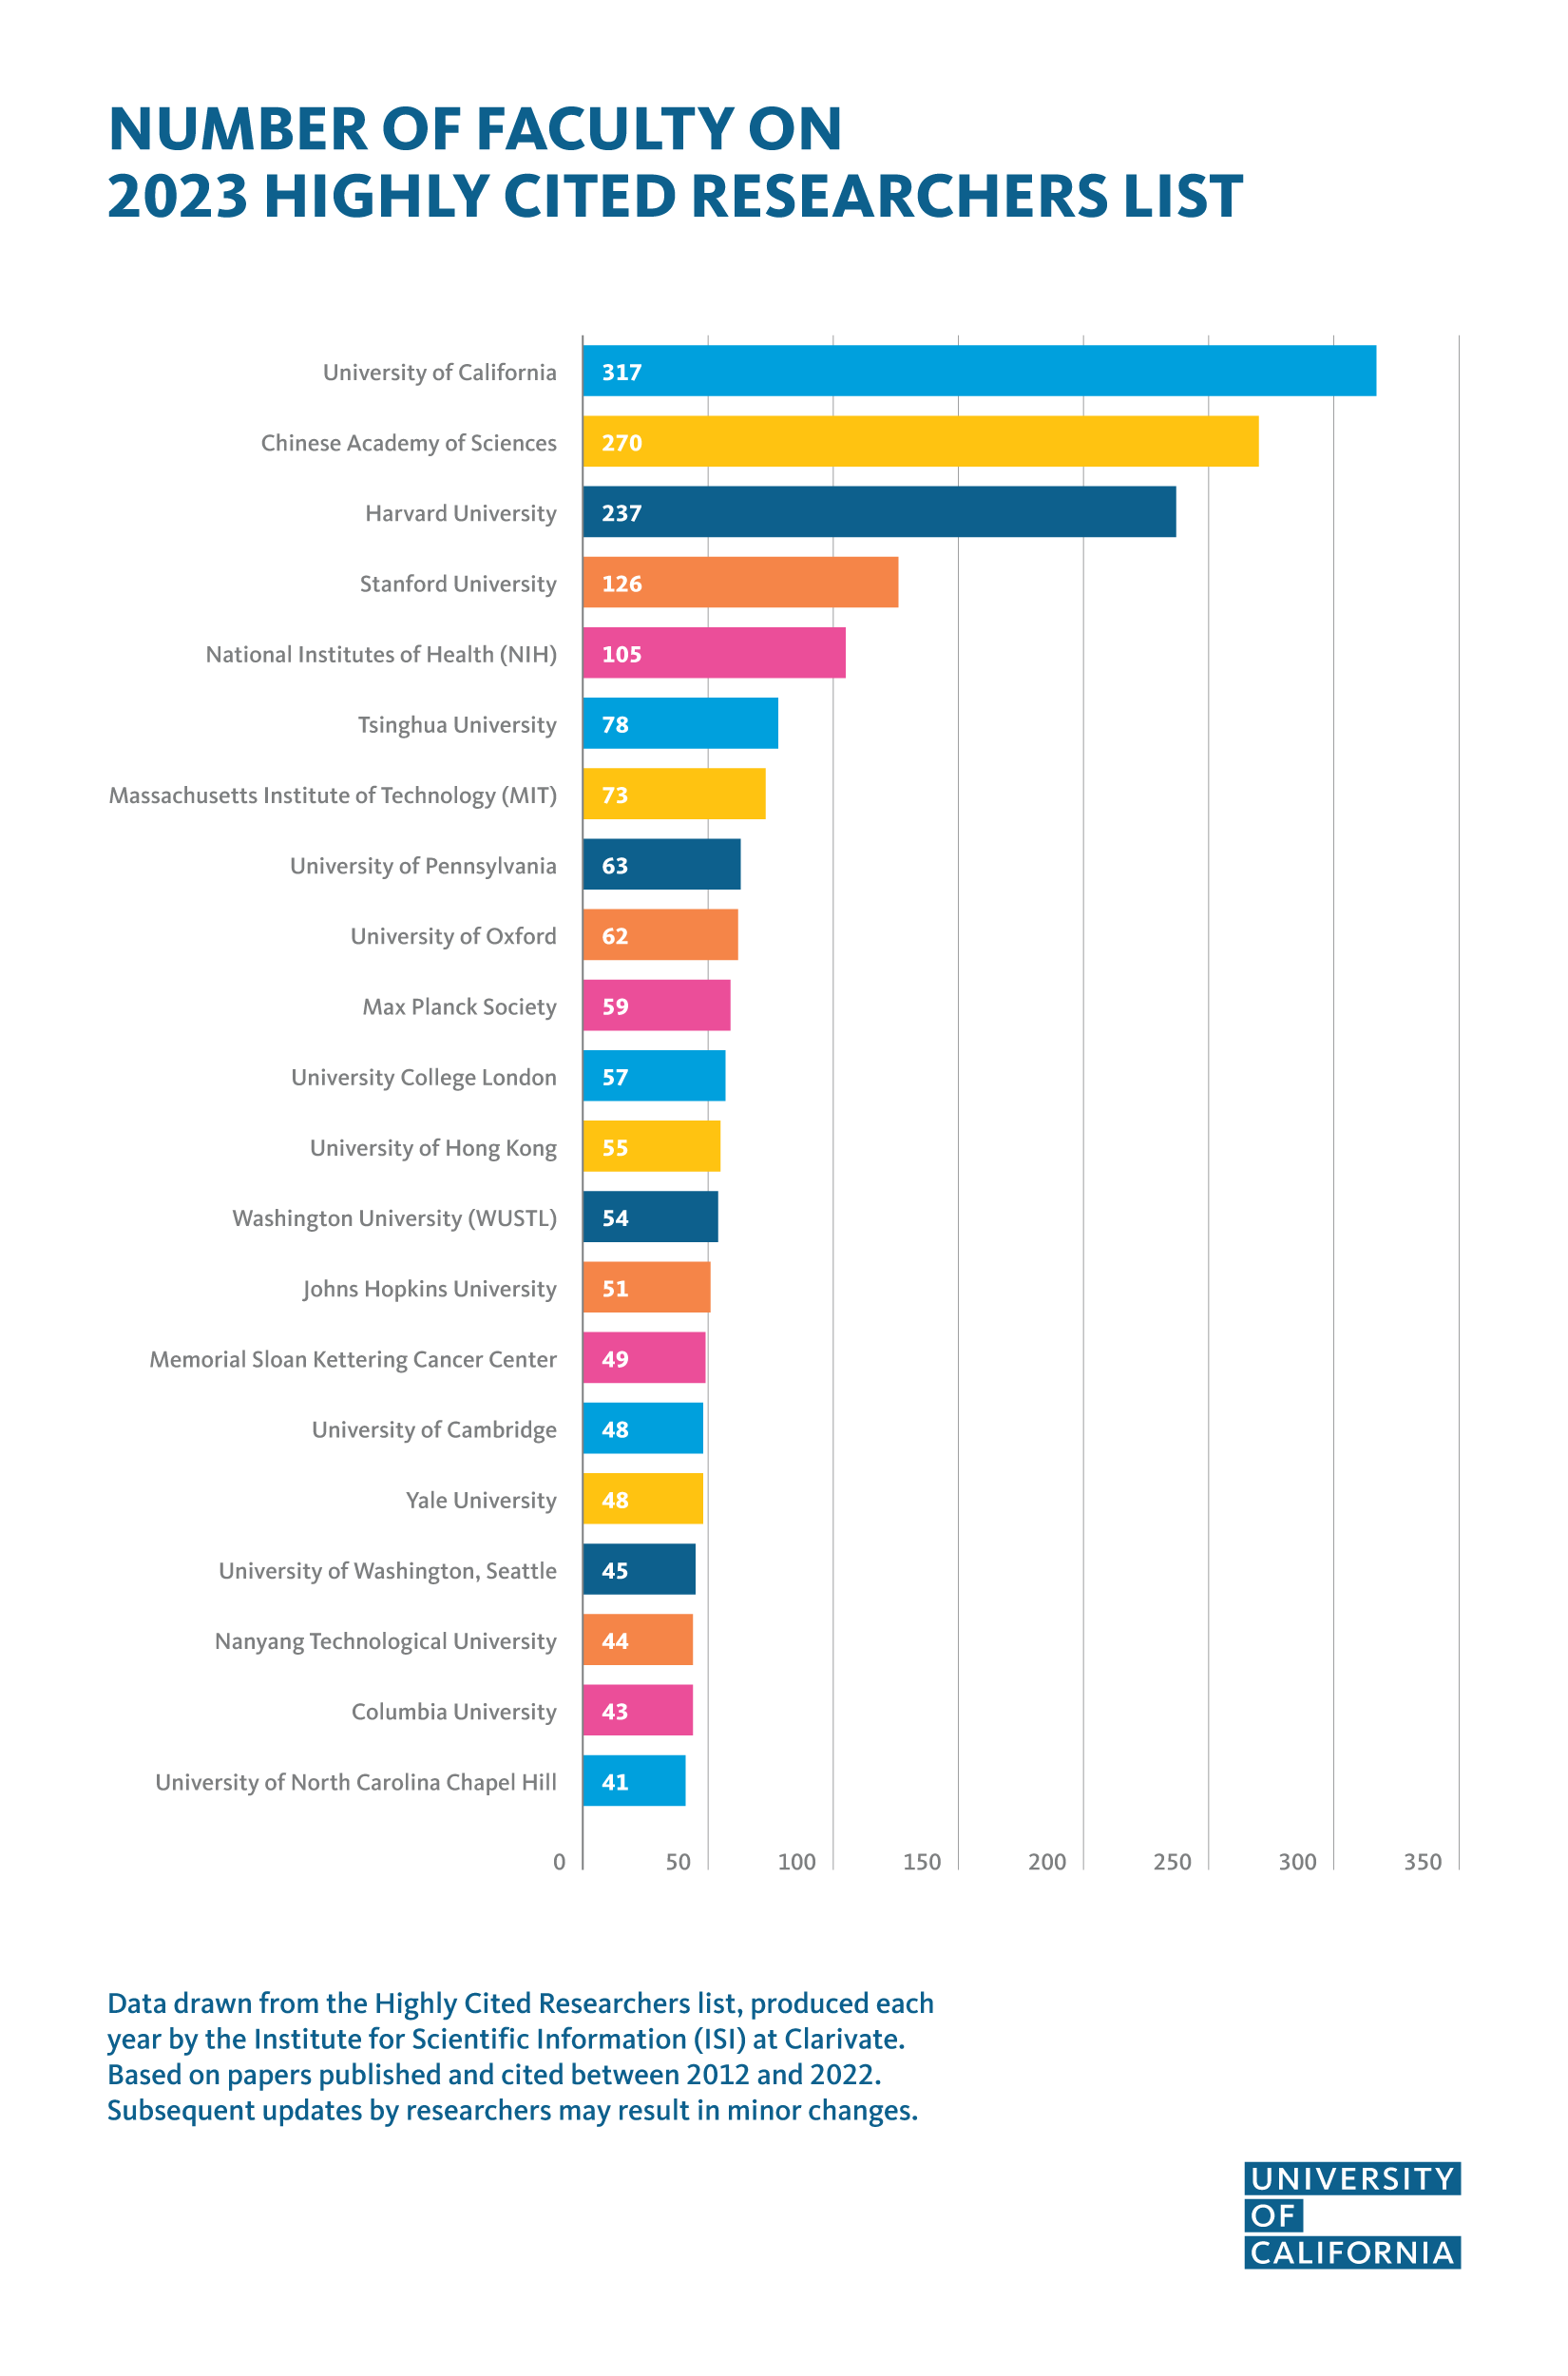 Bar graph showing institutions with Highly Cited researchers according to Clarivate; UC at the top with 317